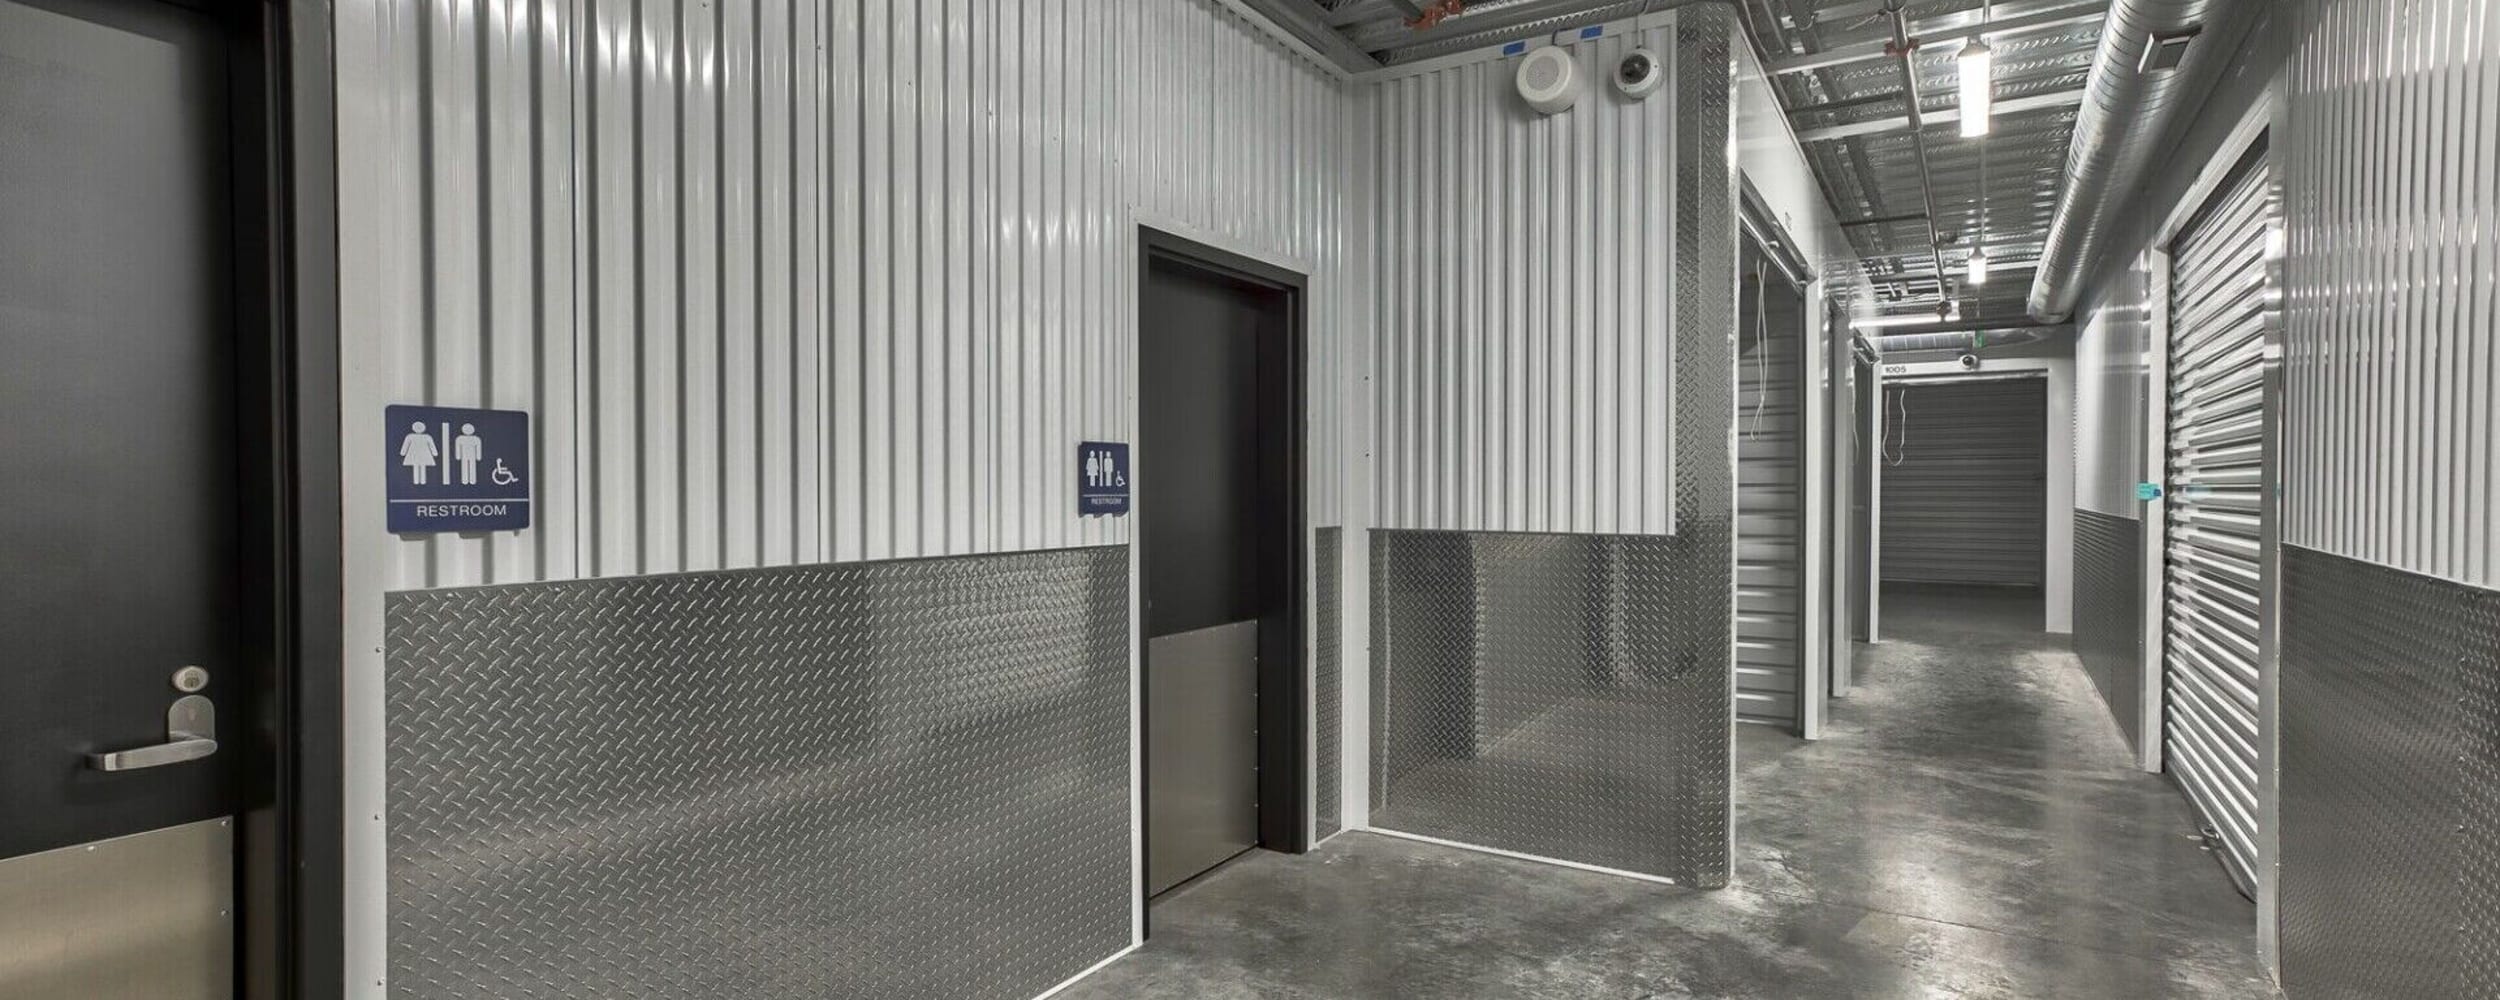 Restrooms near the units at Advanced Heated Self Storage Bellingham in Bellingham, Washington